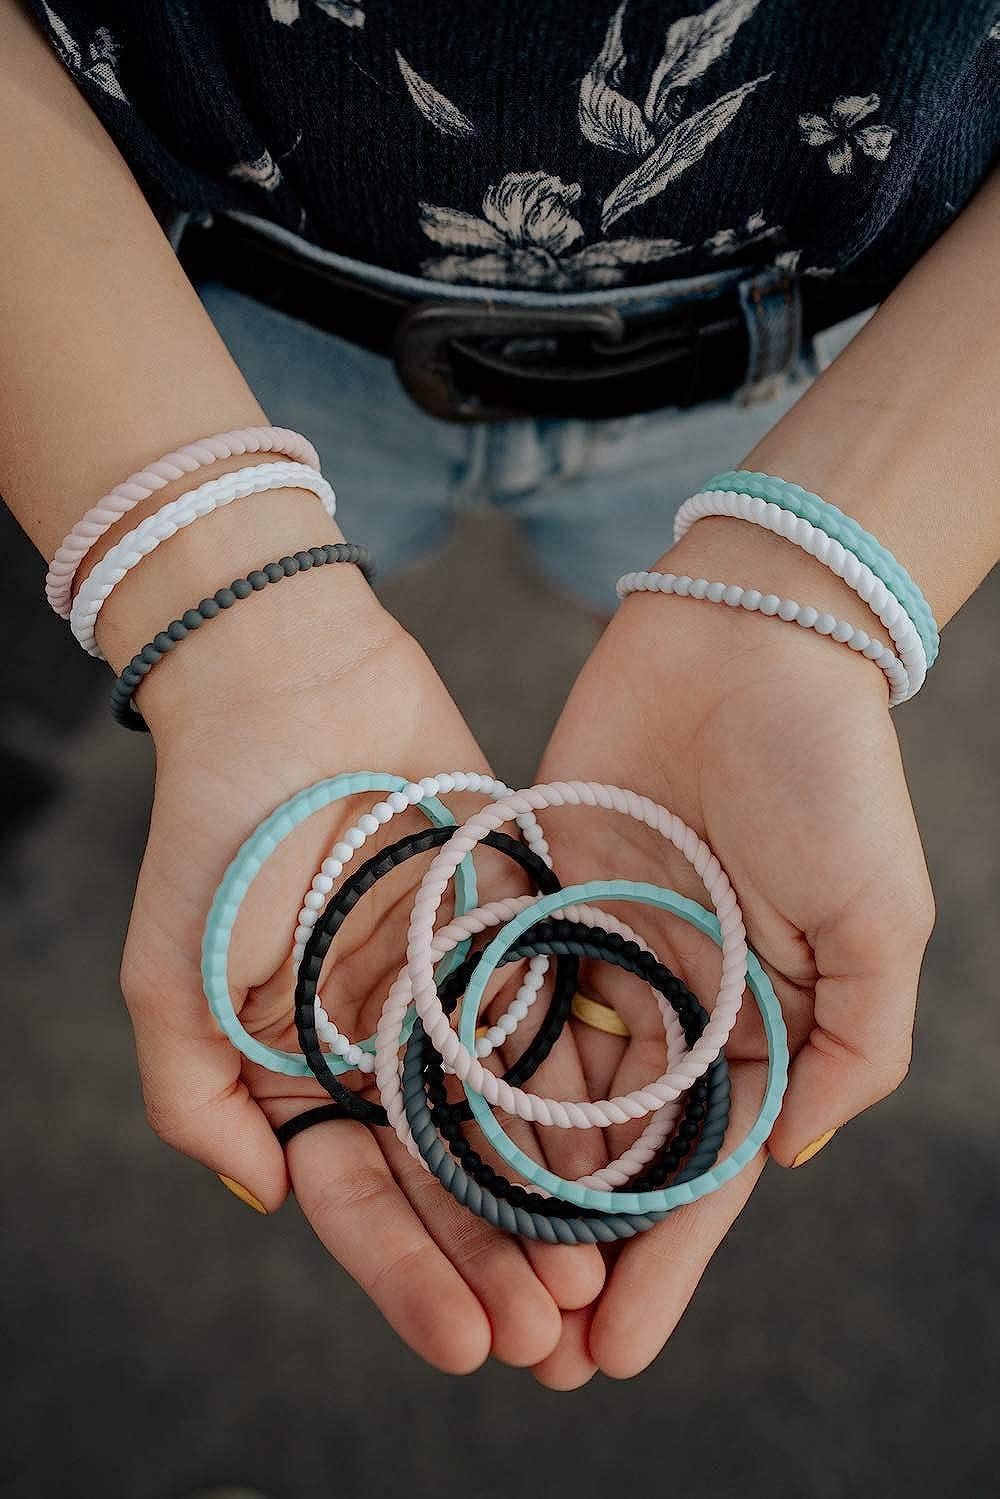 What materials are best for hypoallergenic bracelets?